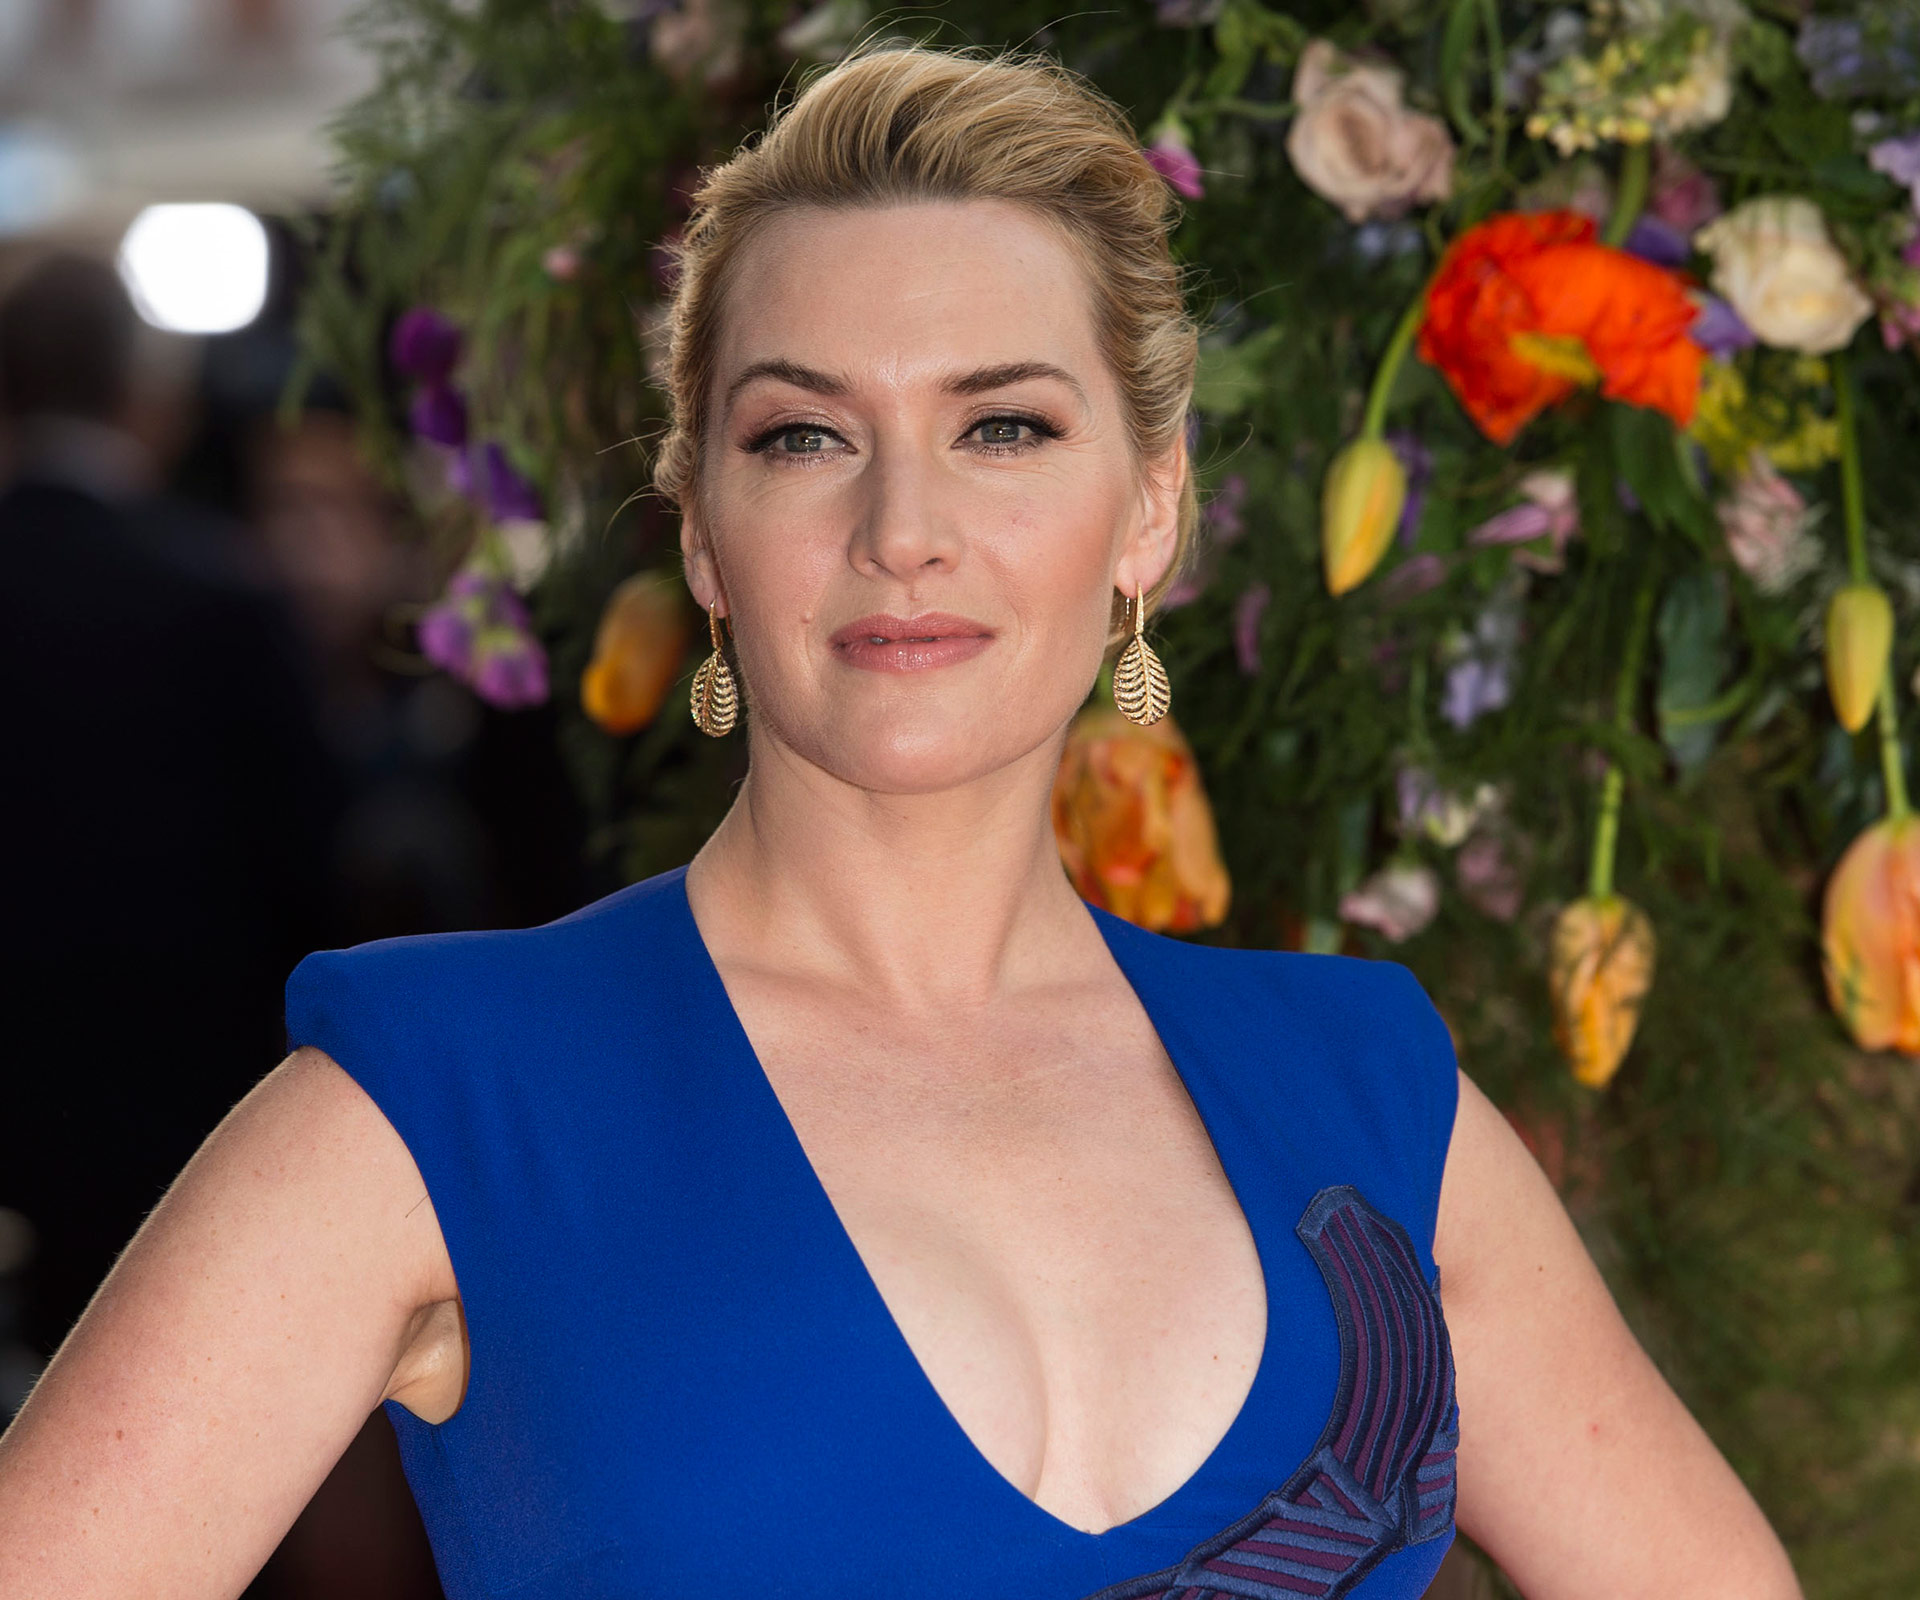 Kate Winslet talks candidly about sex scenes